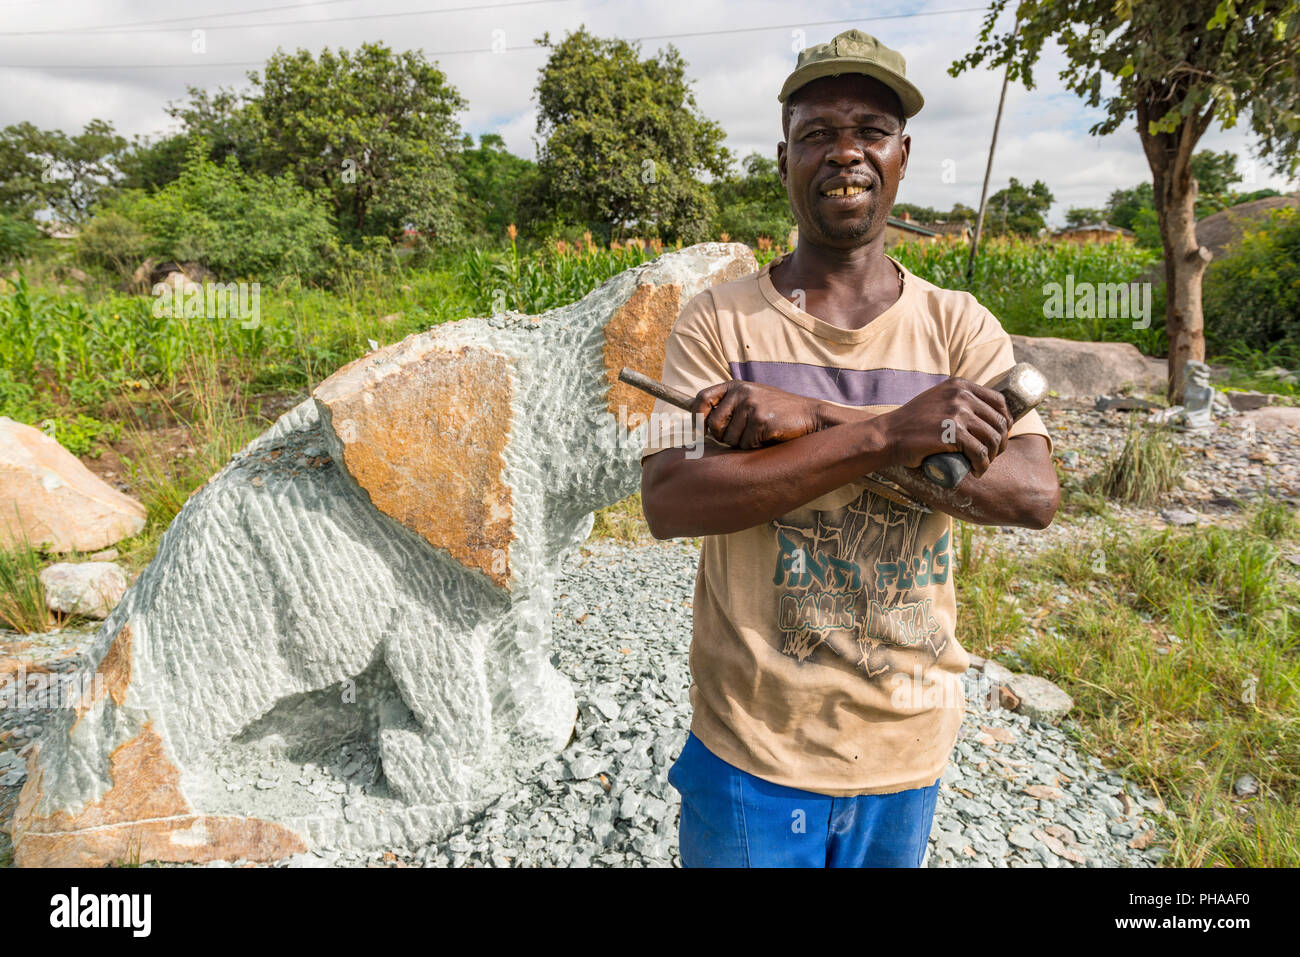 A stone carver seen in Harare, Zimbabwe Stock Photo